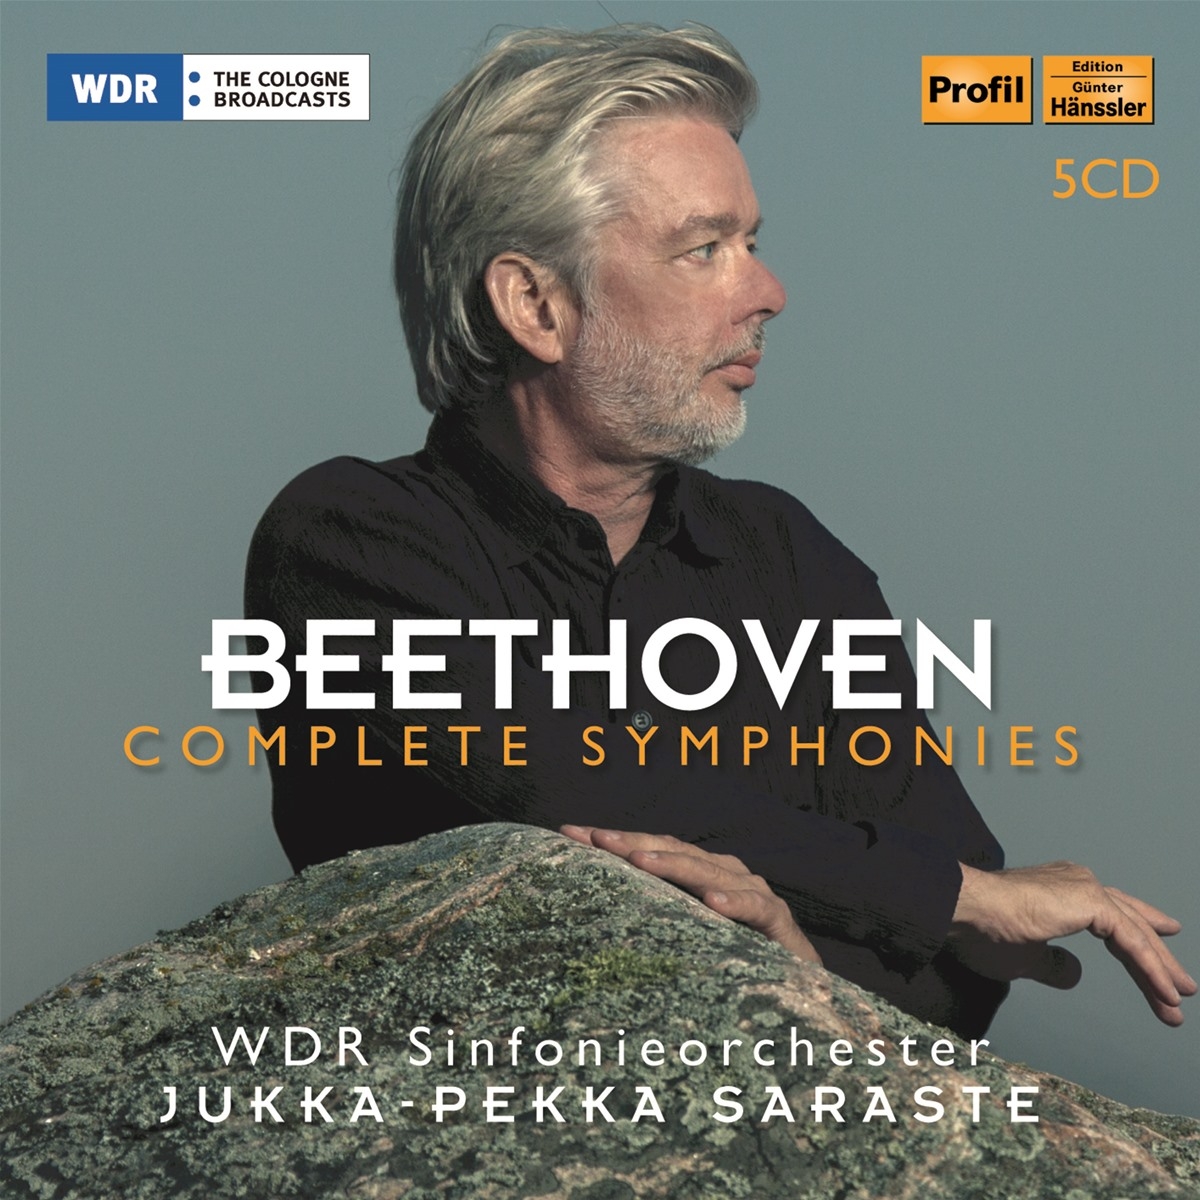 Beethoven-Complete Symphonies